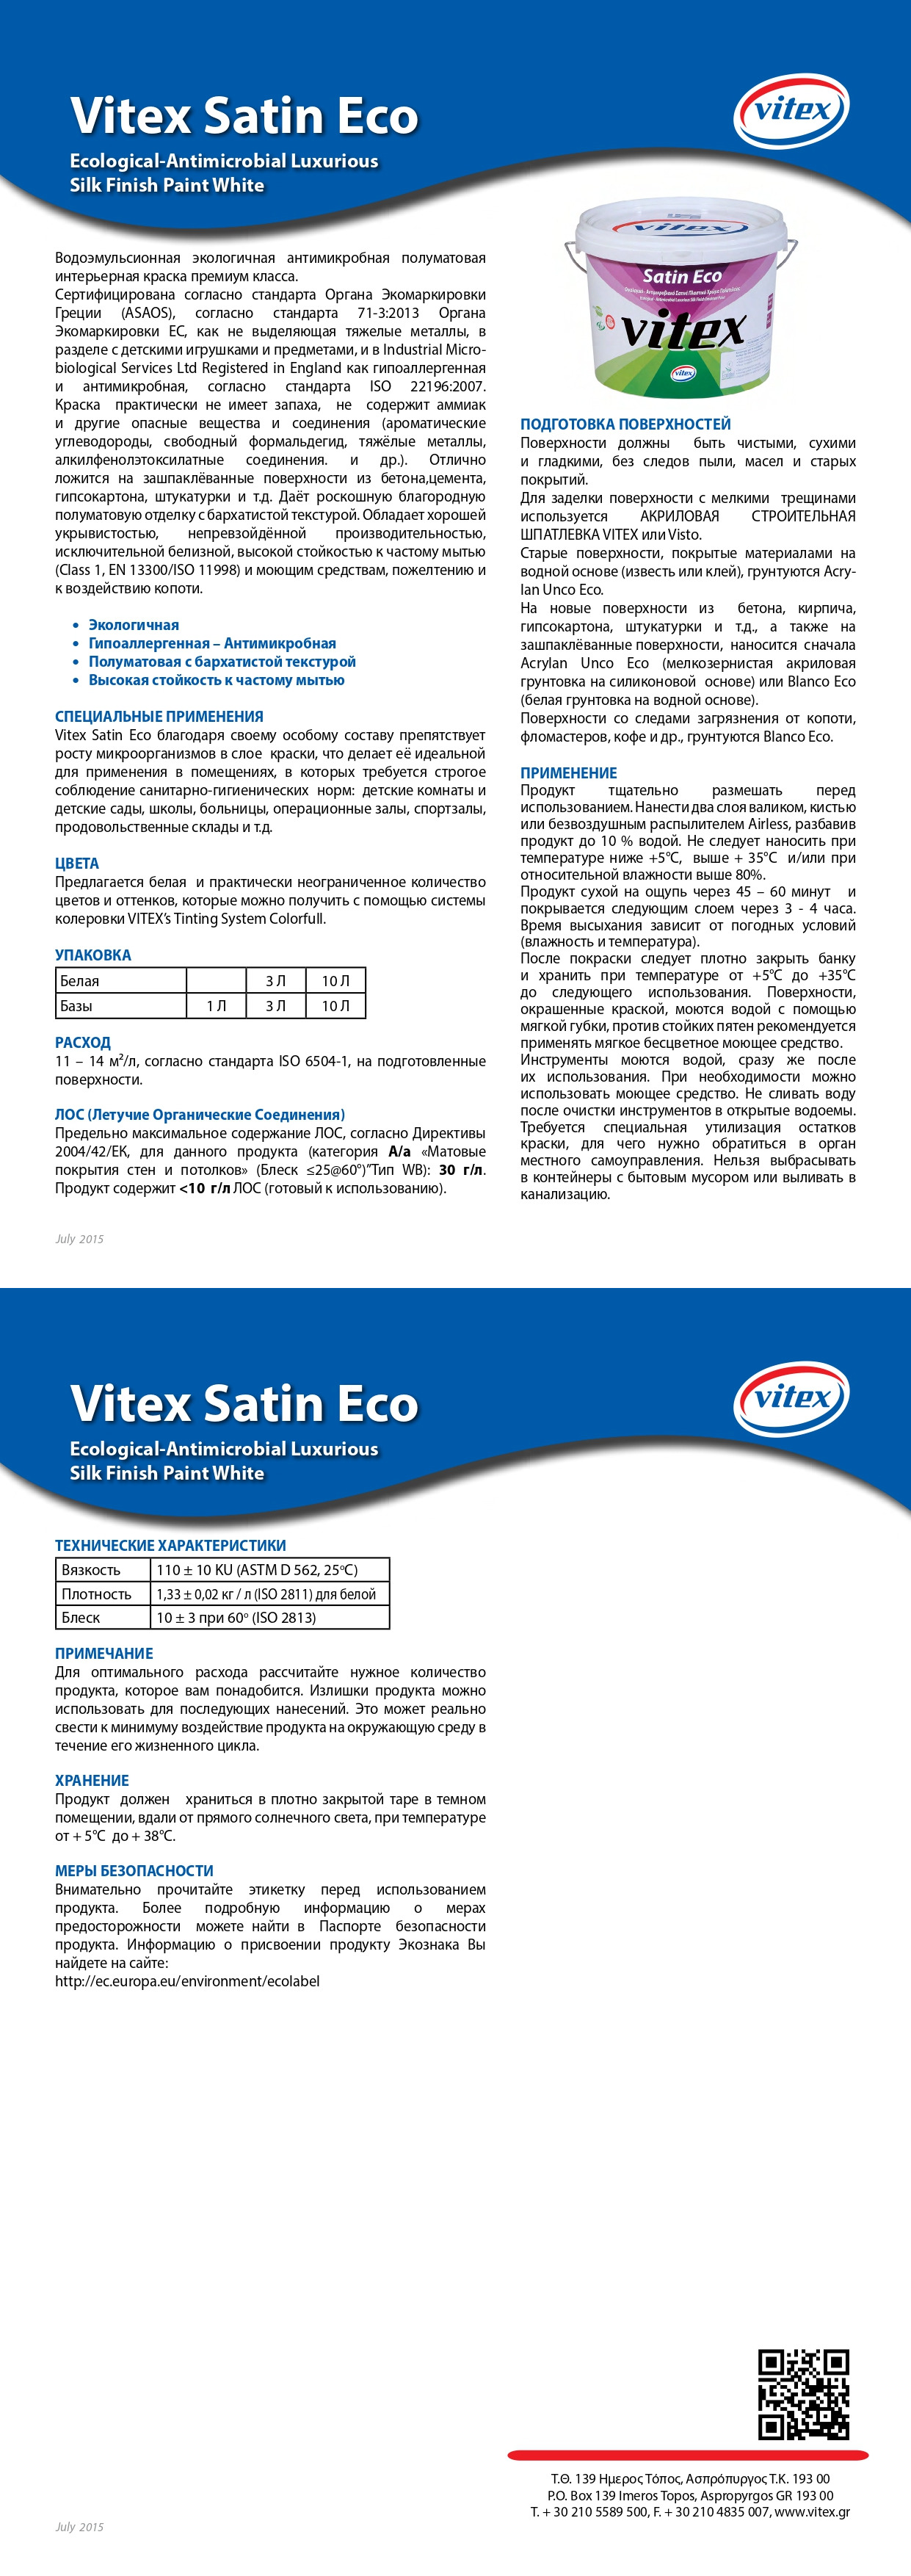 Vitex Satin Eco Ecological-Antimicrobial Luxurious Silk Finish Paint White info